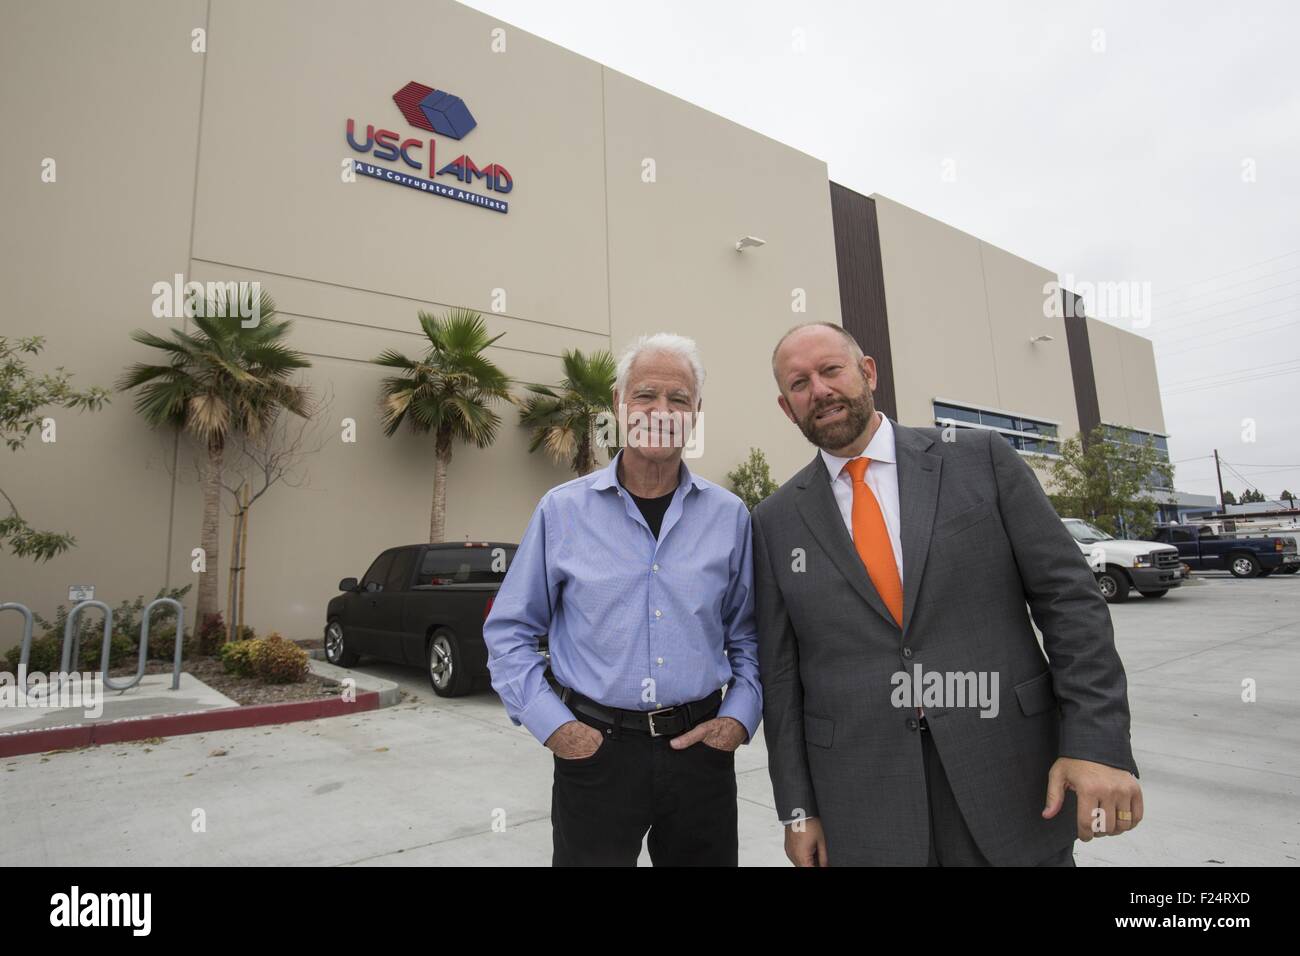 Los Angeles, California, USA. 18th Aug, 2015. David Weissberg, right, CEO  of Acorn Paper Products Co.,